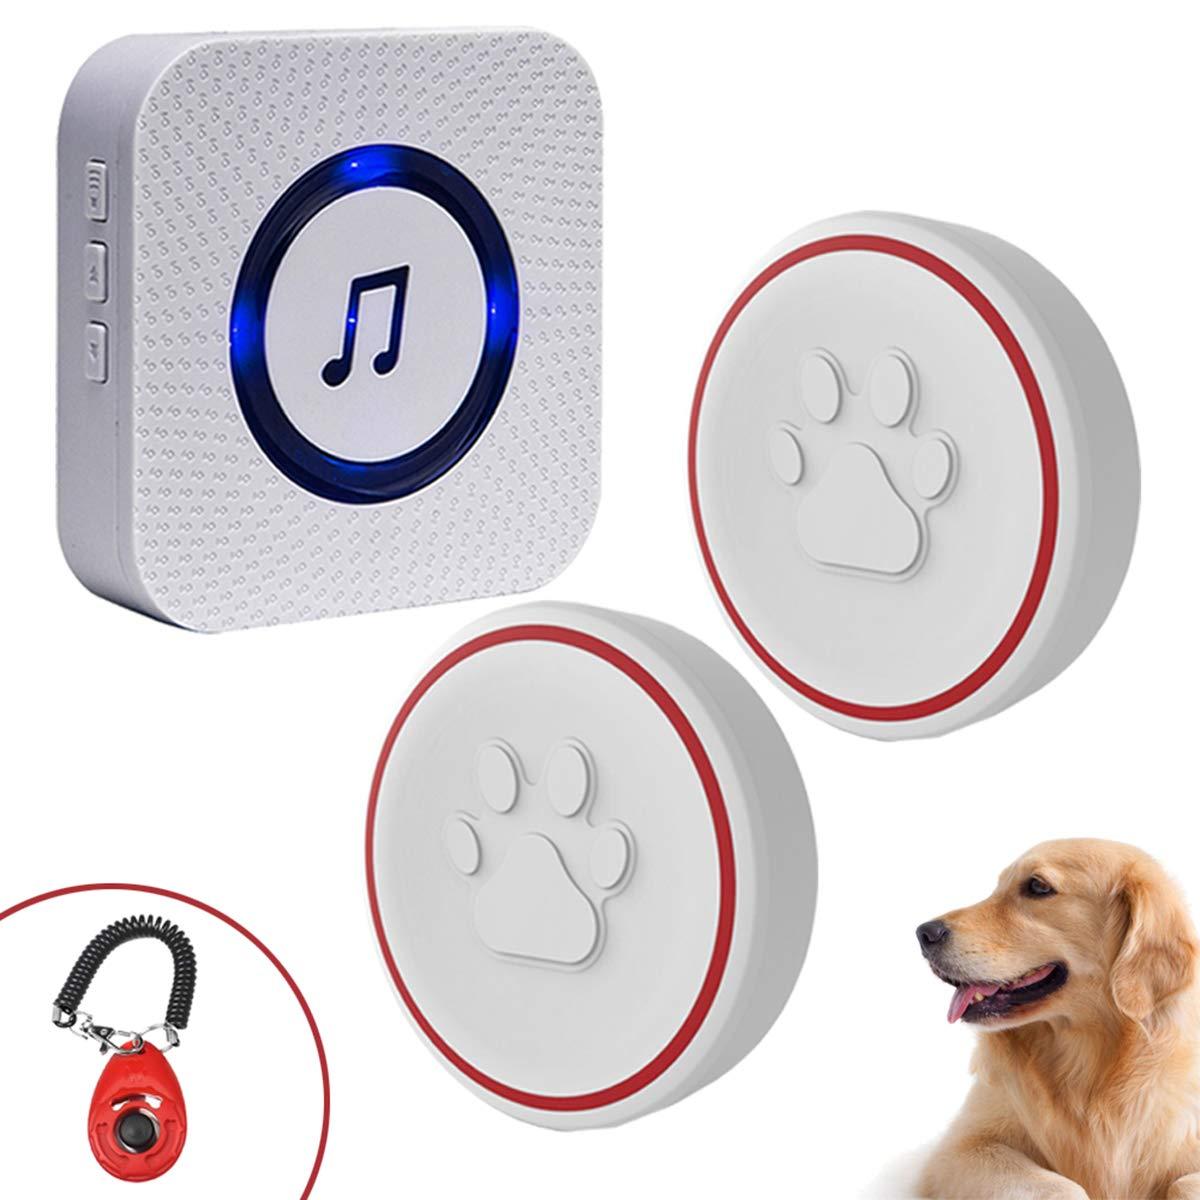 ChunHee Dog Bell for Potty Training Wireless Doggie Door Bell for Dog Puppy Training Sliding Door/Go Outside Doorbell and Waterproof Touch Button